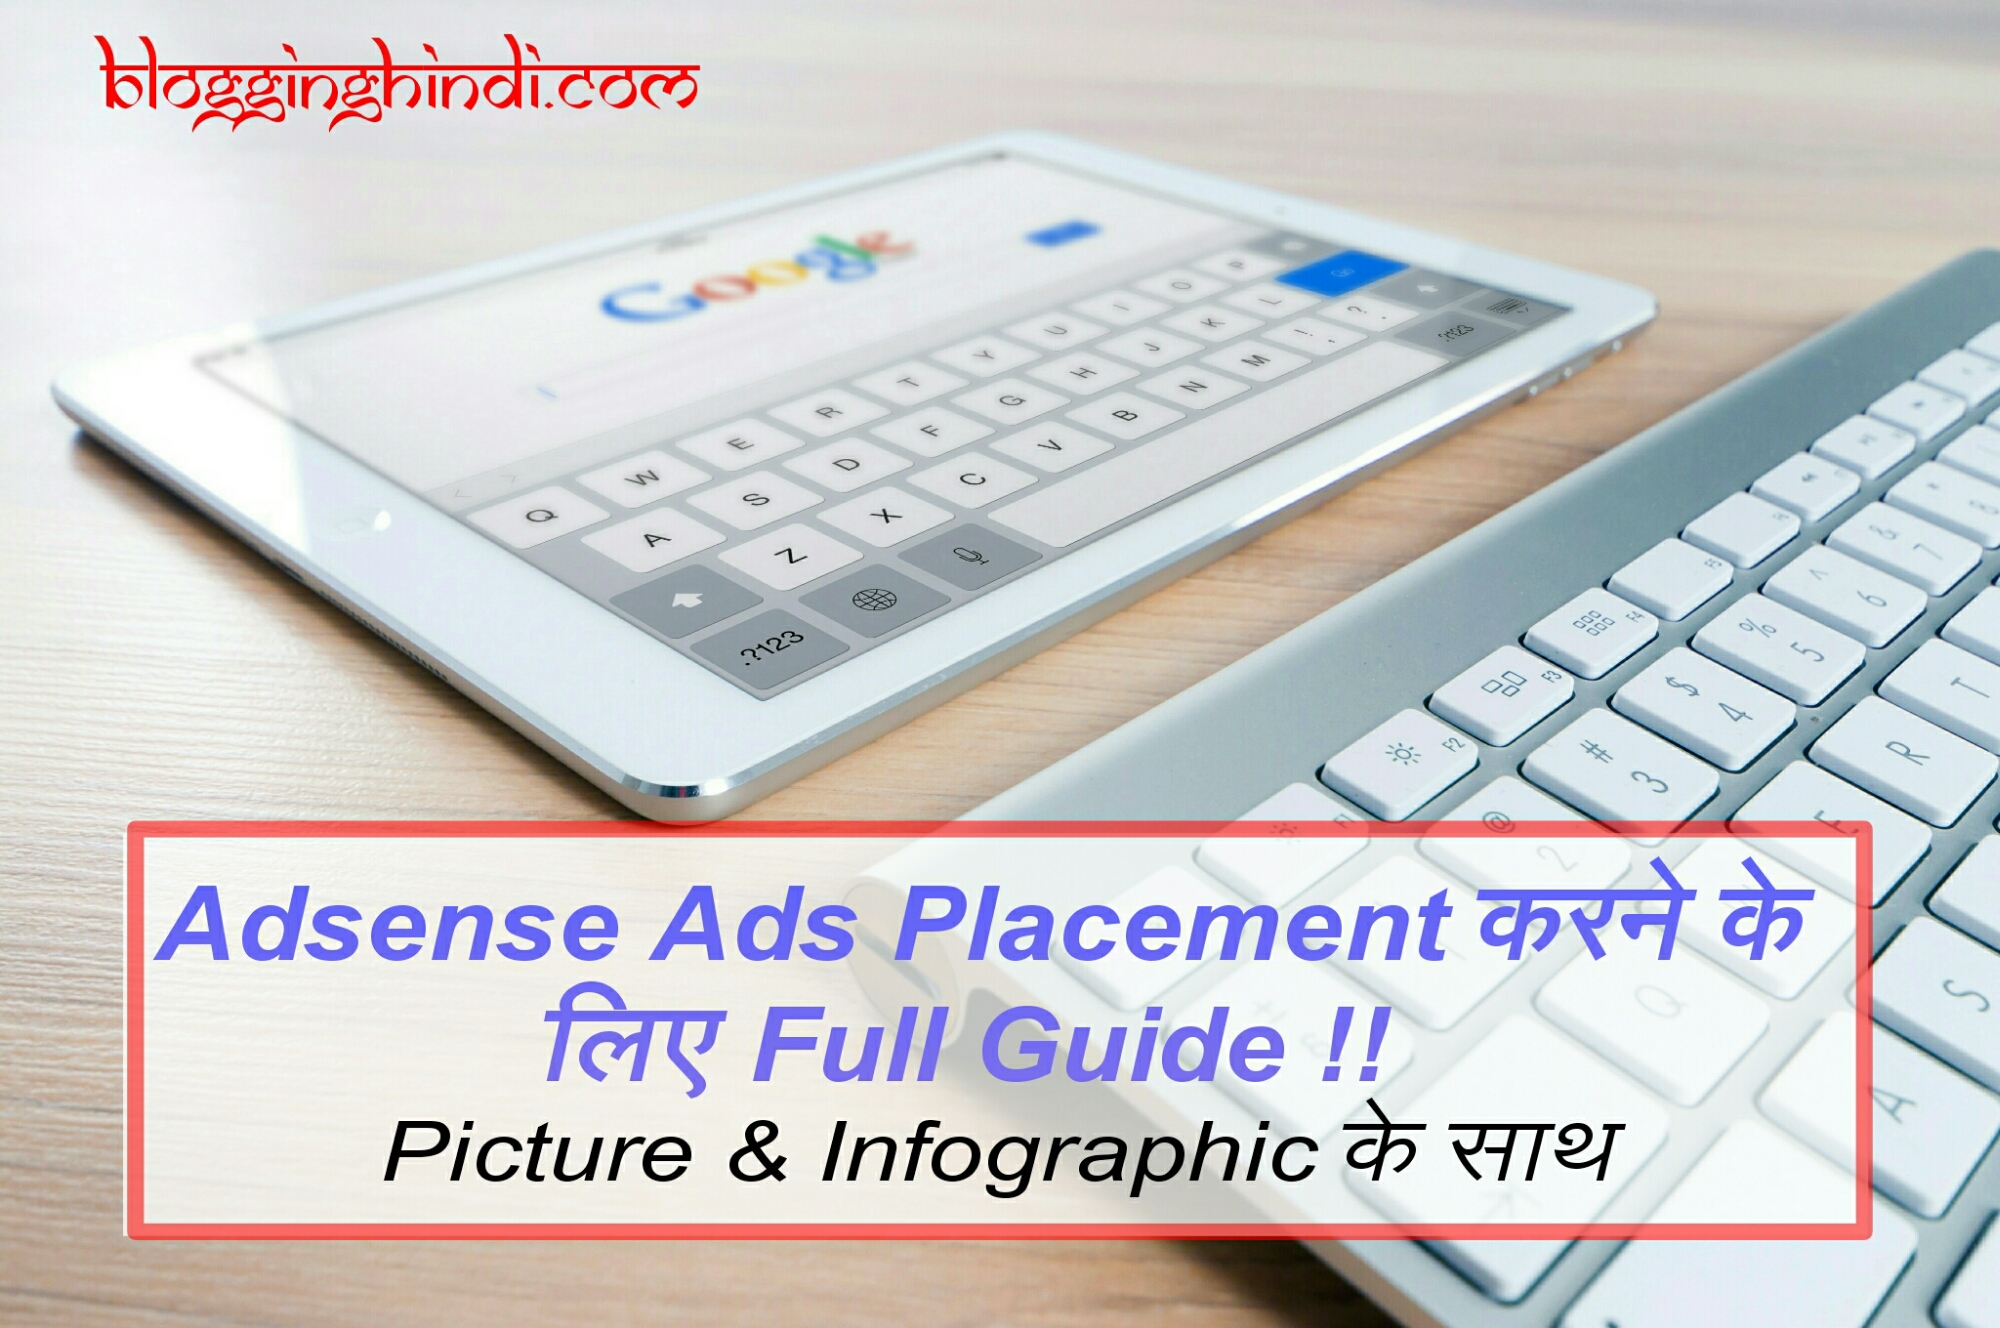 Adsense Ads Placement Full Guide - With Infographic in Hindi 1